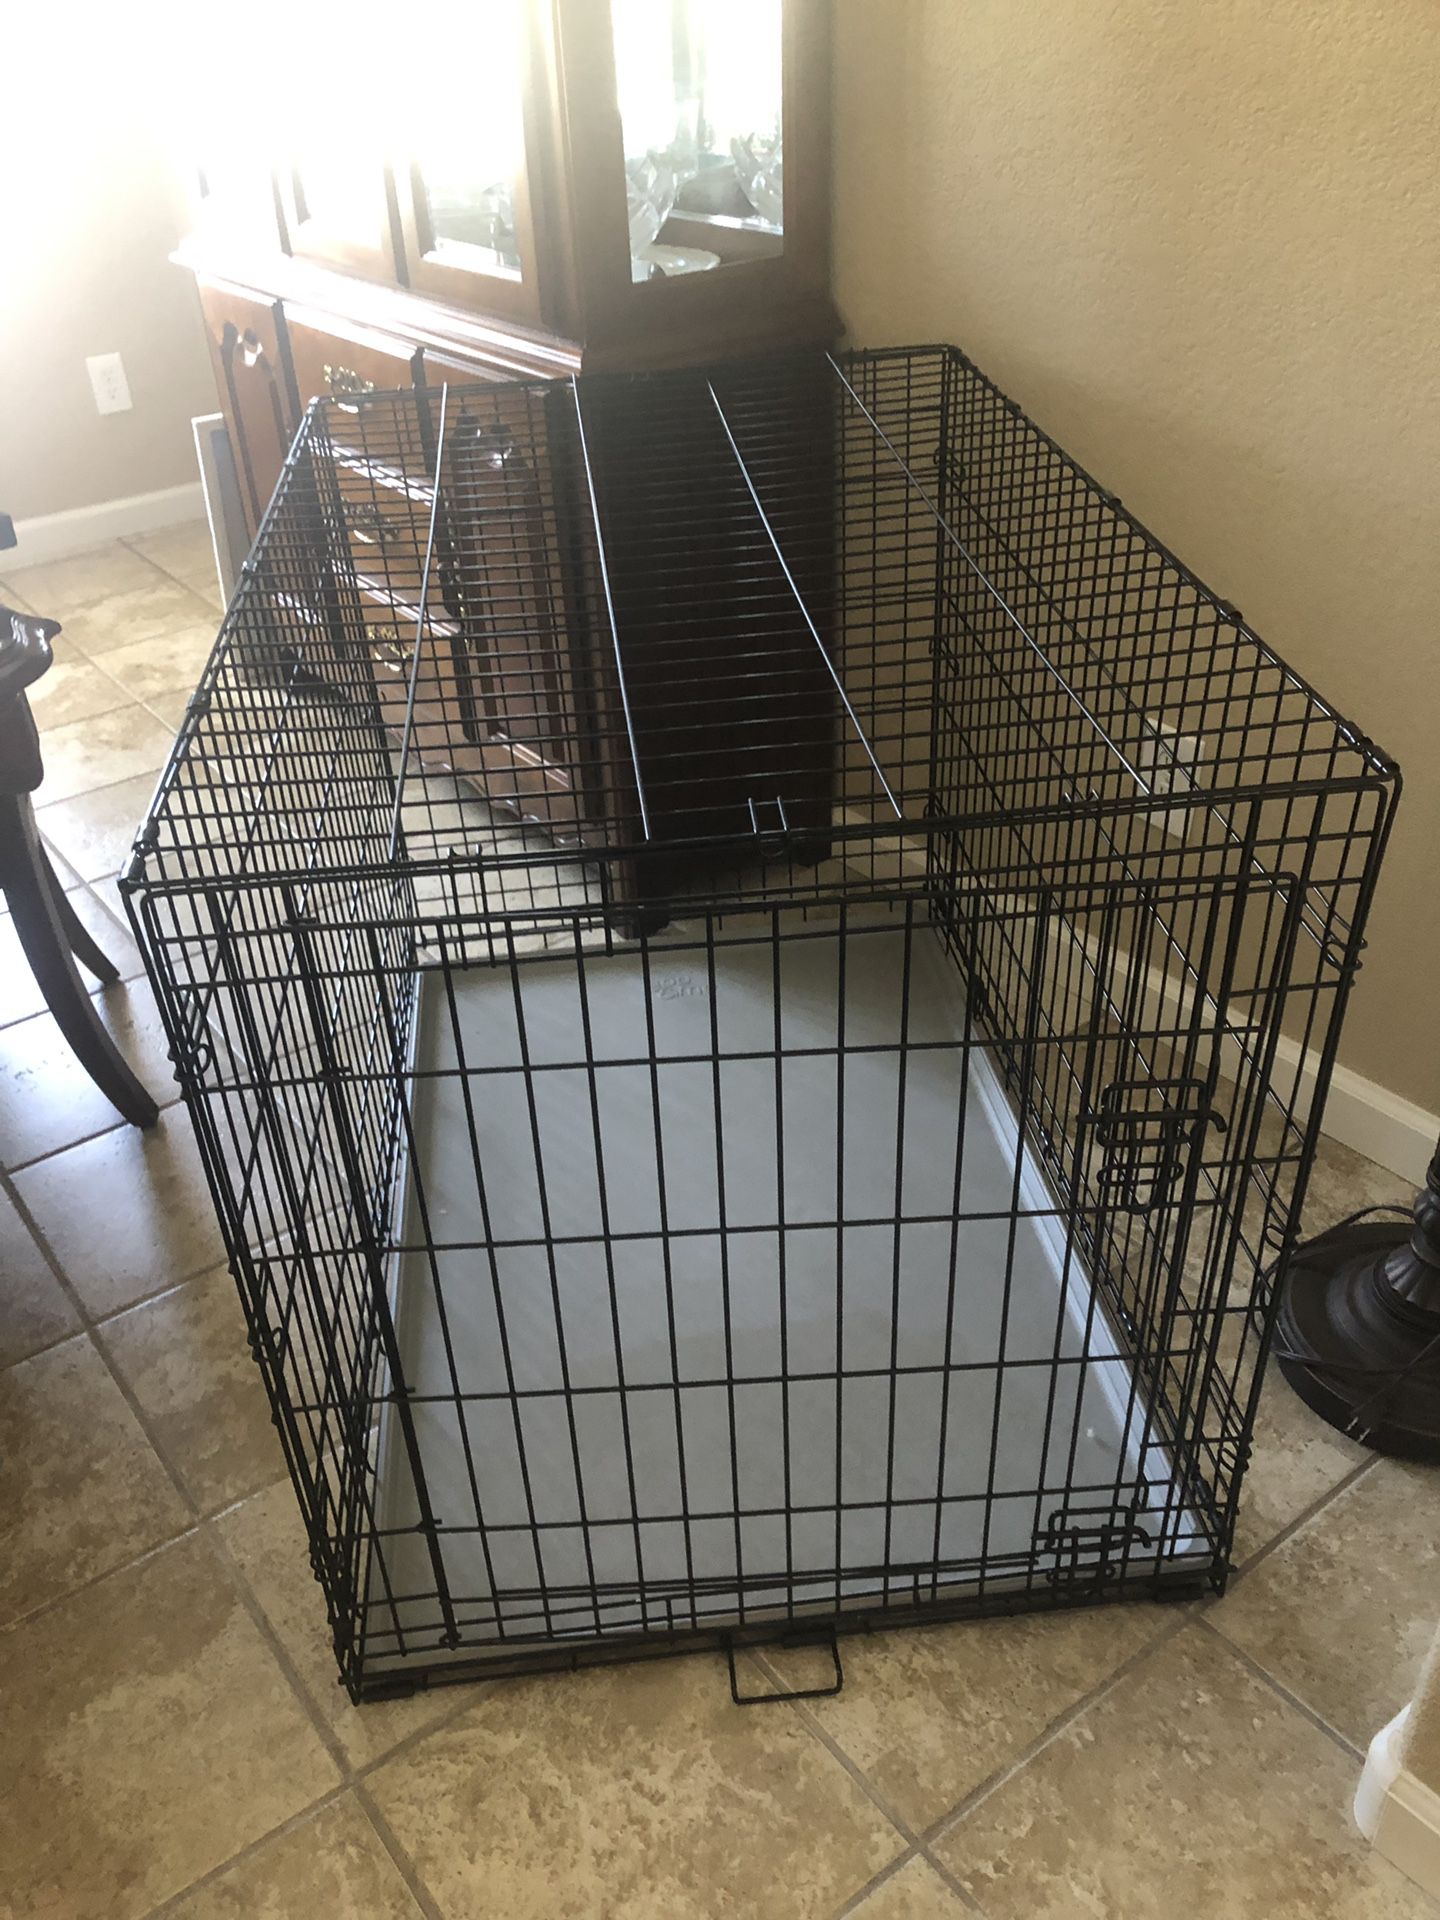 XL dog kennel/crate